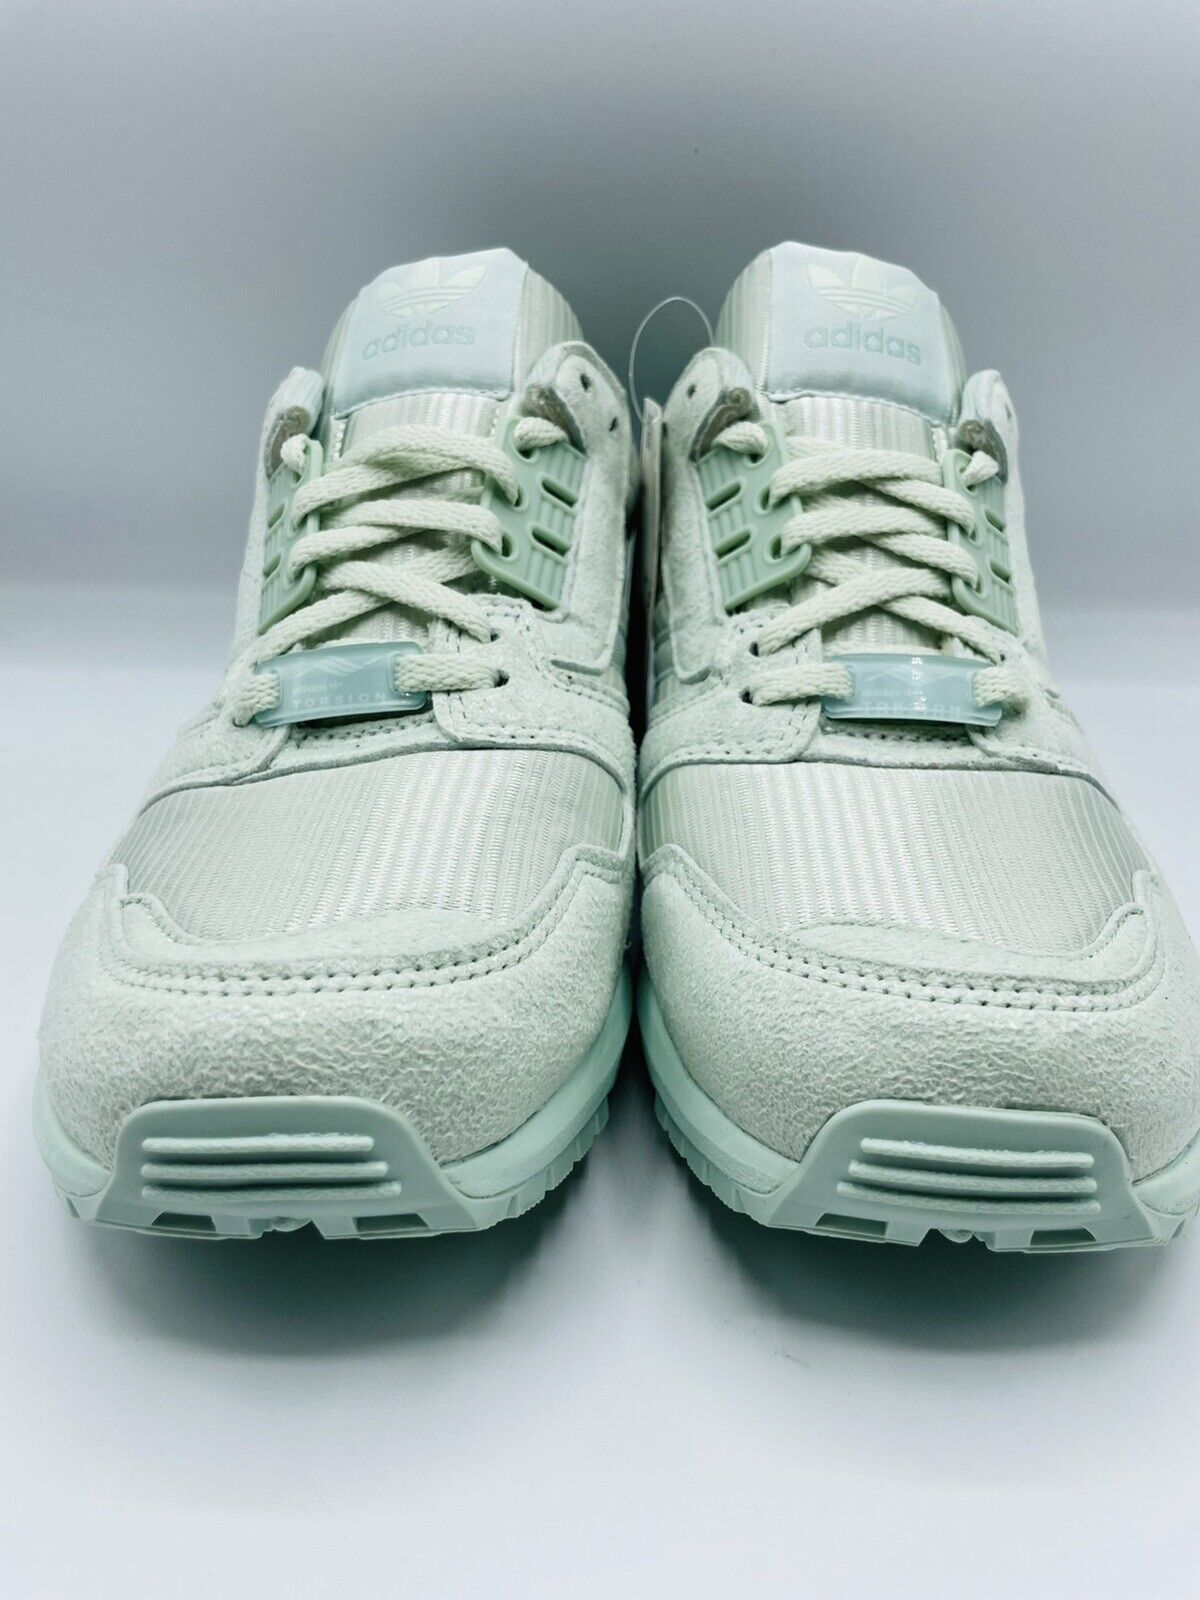 Adidas ZX 8000 Linen Green Mens Athletic Running Lifestyle Shoes Size 8  EF4365